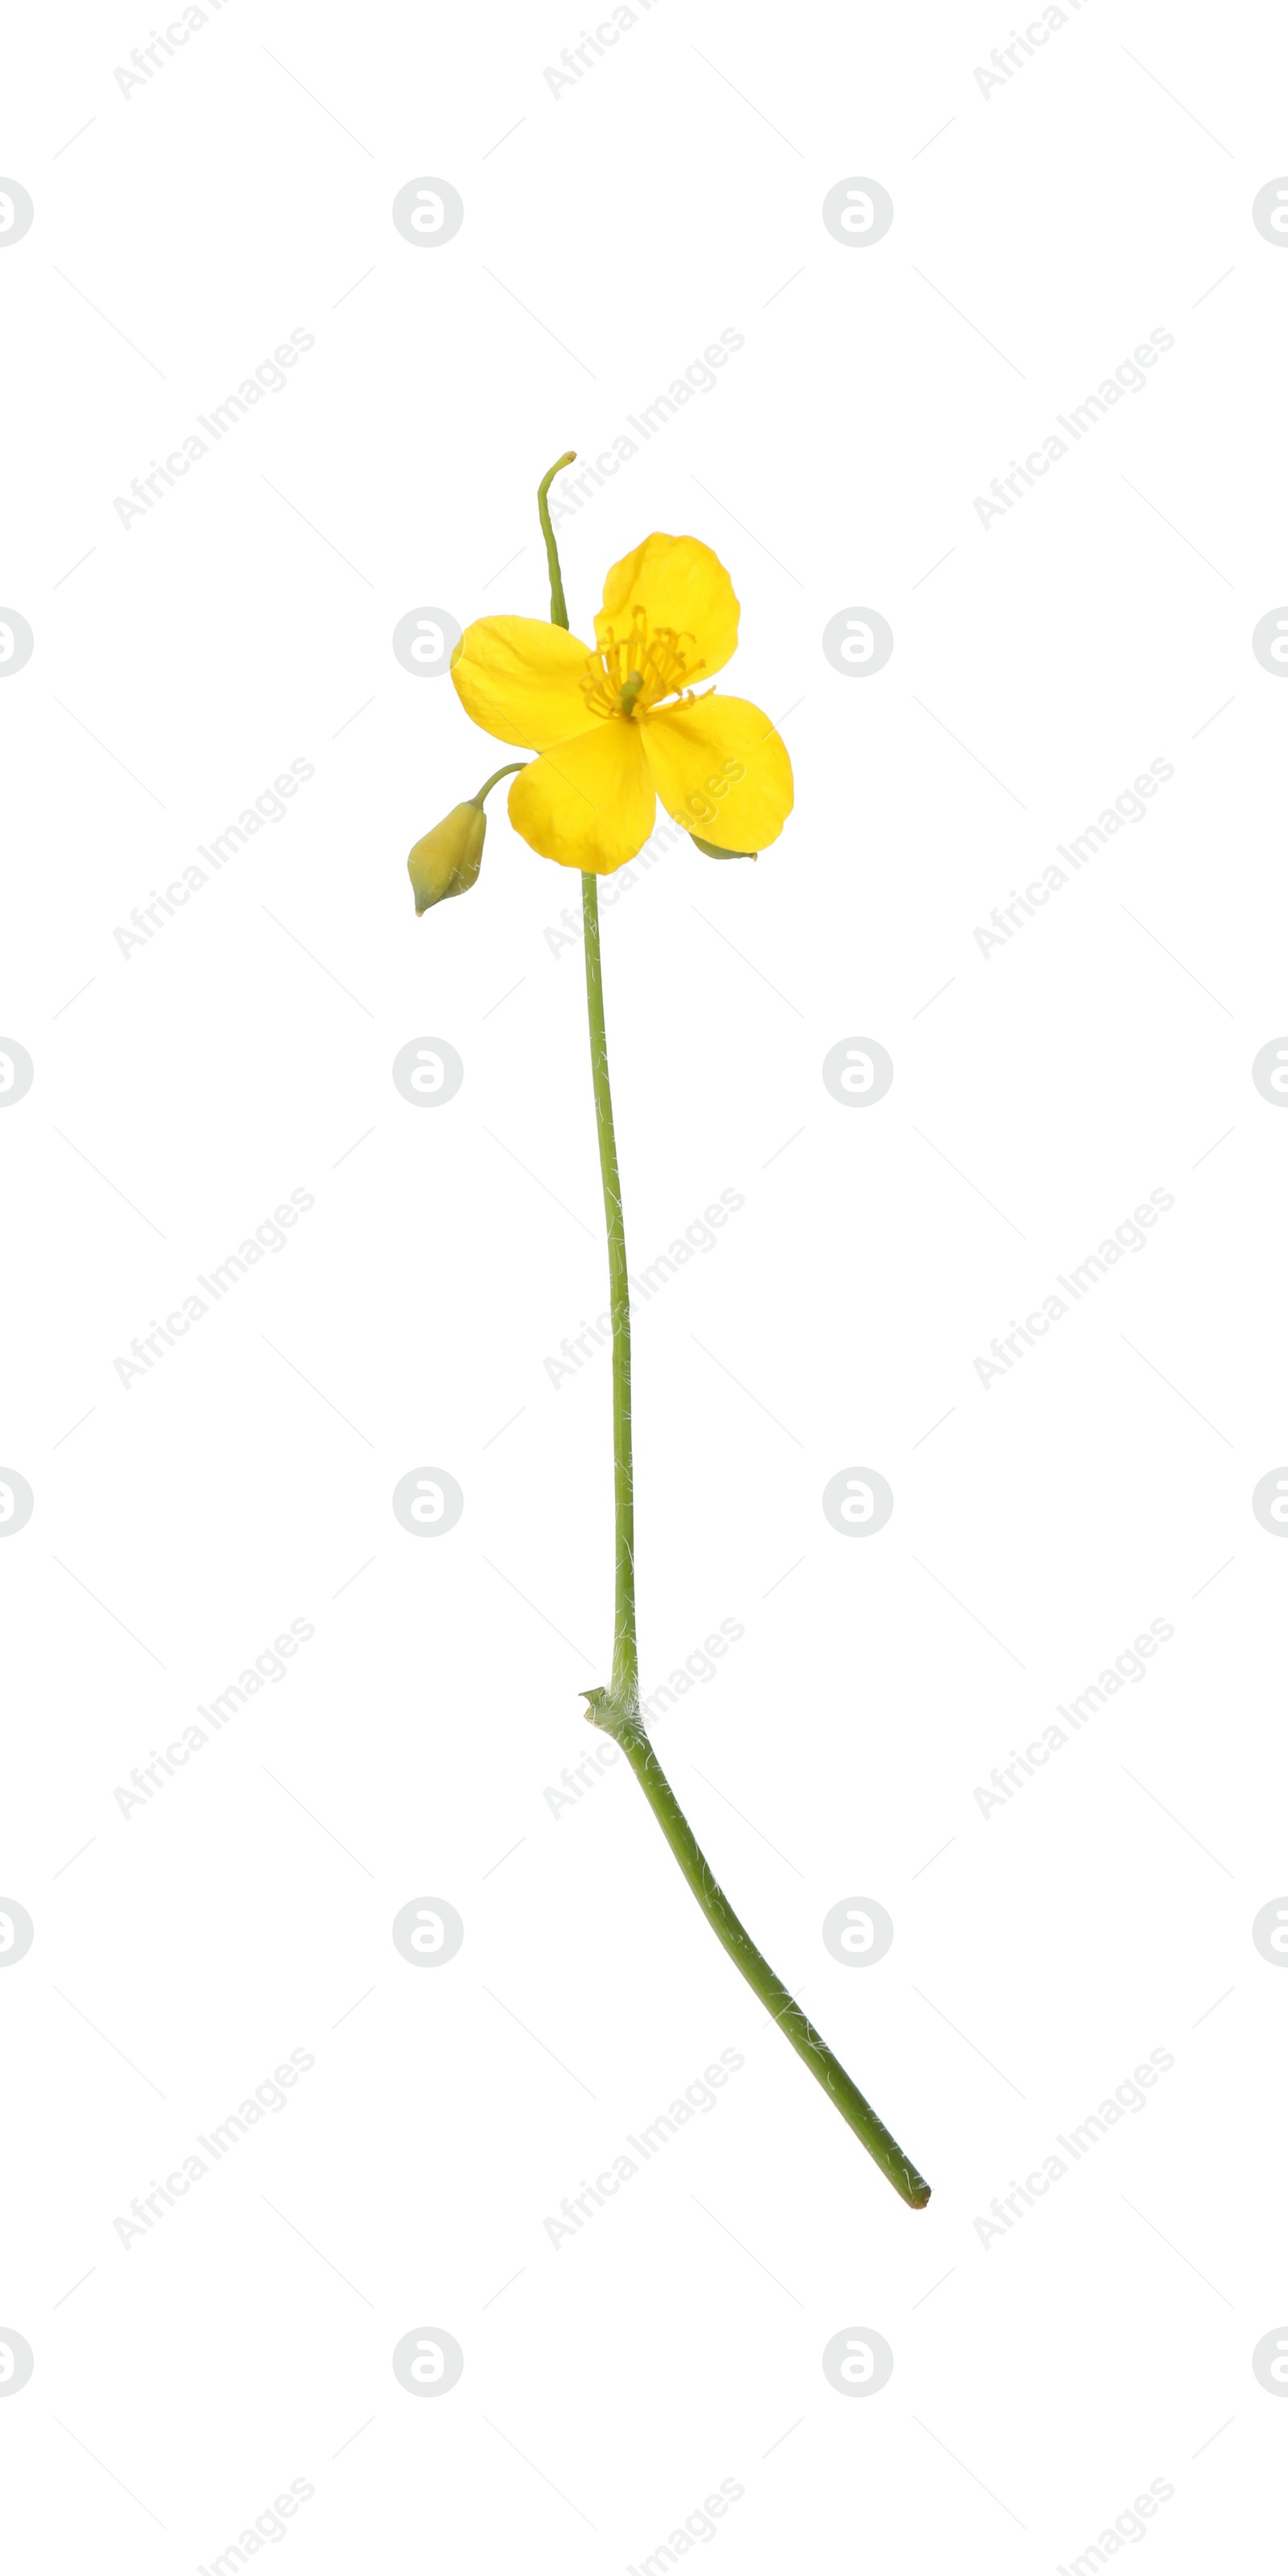 Photo of Celandine with yellow flower isolated on white